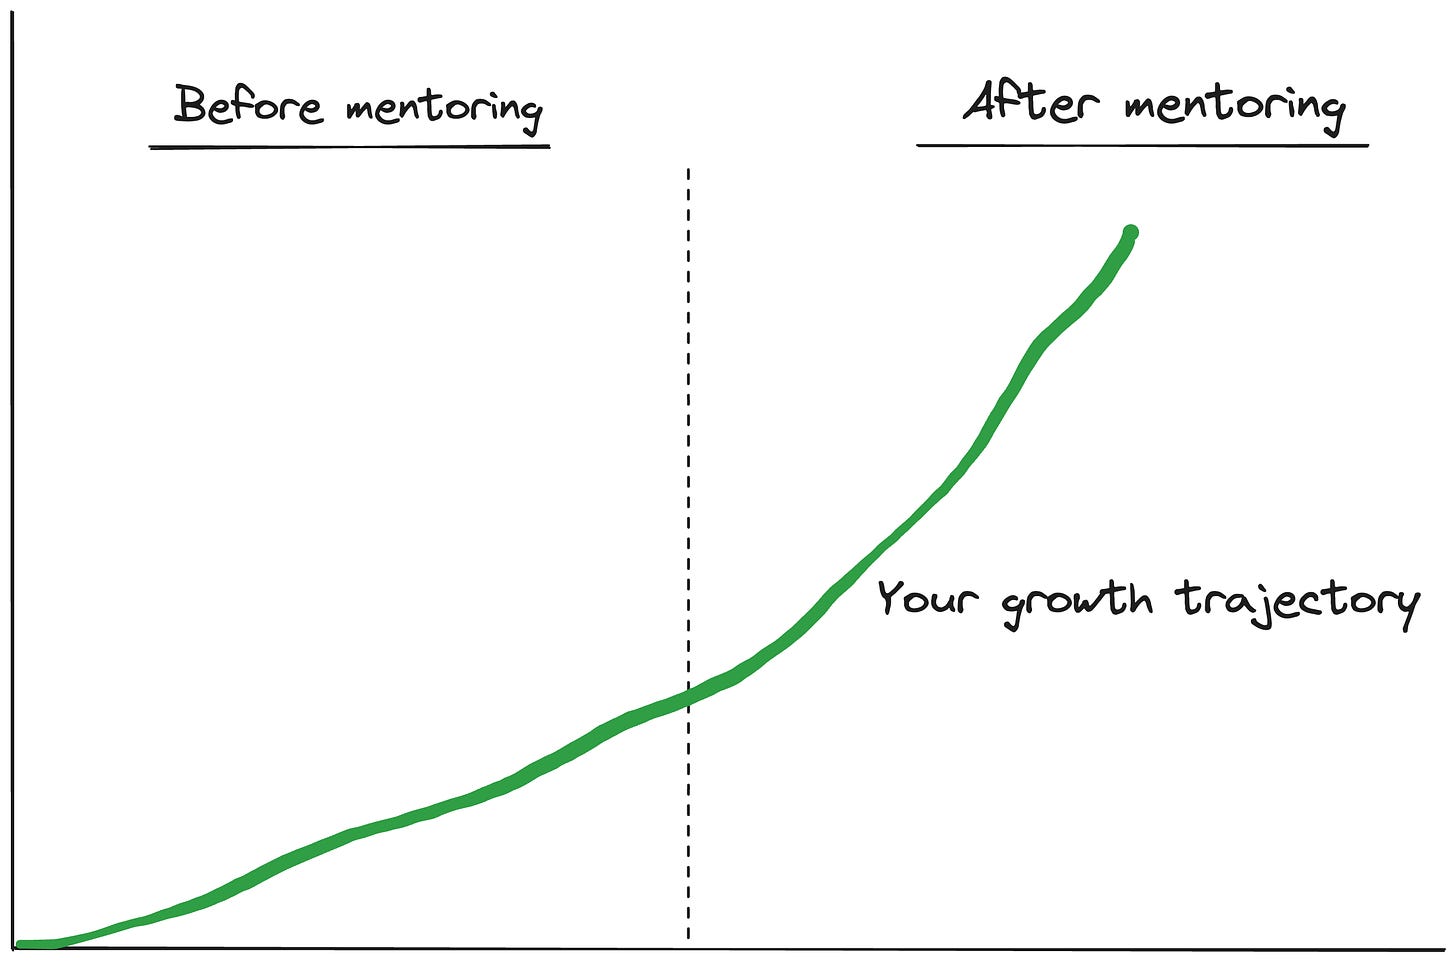 Your growth trajectory goes exponential after starting to mentor others